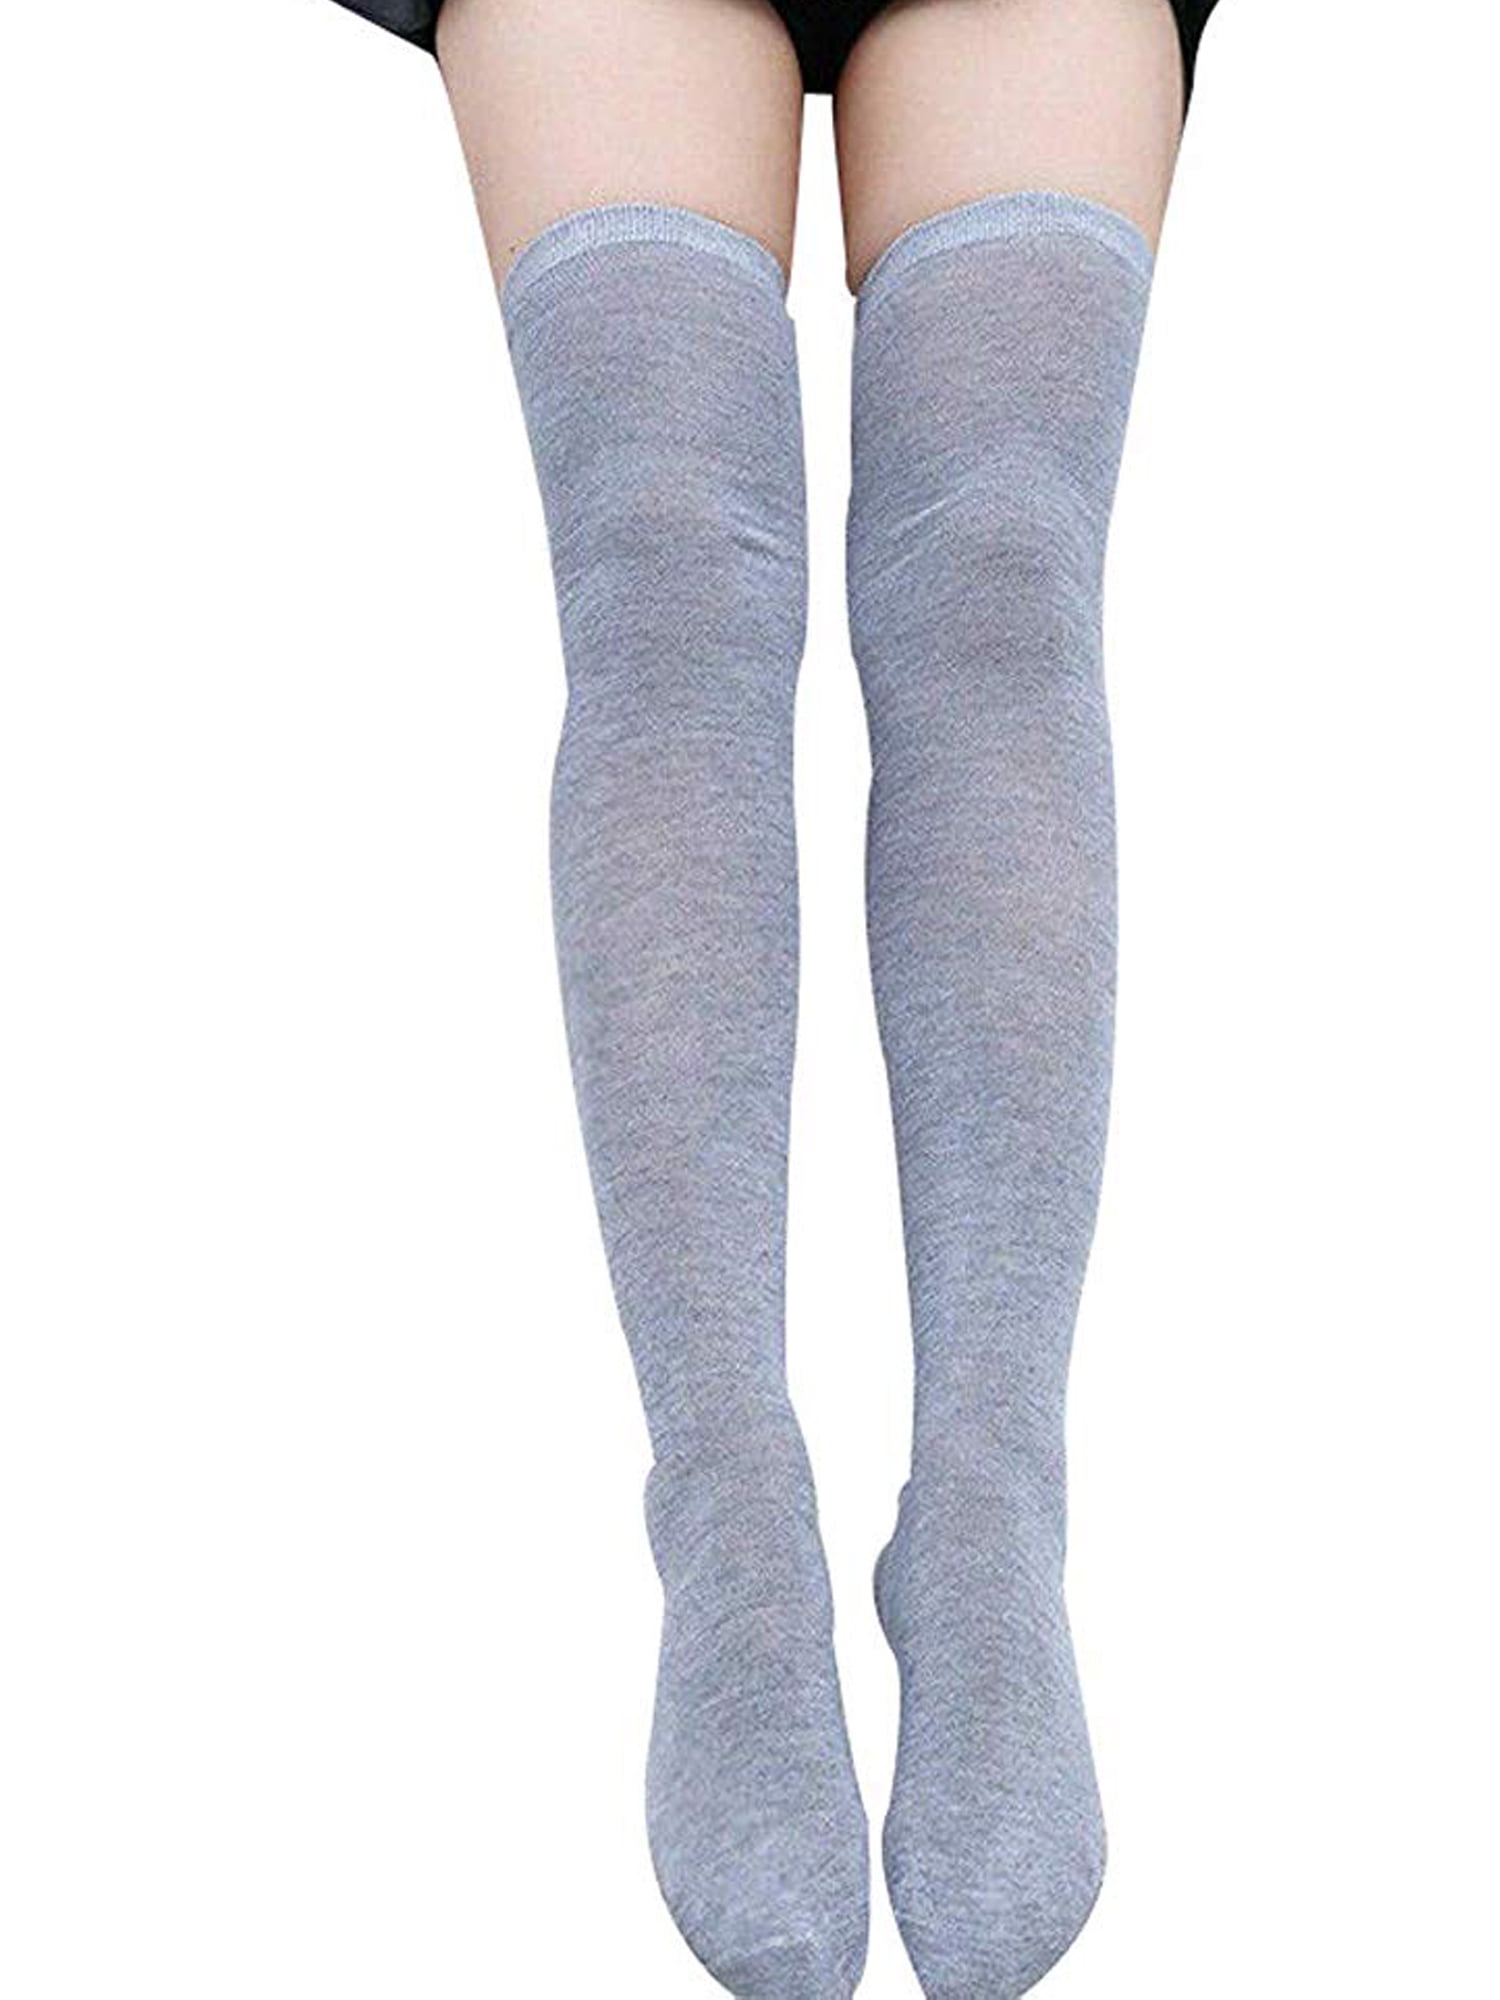 Women Stocking Cable Knit Extra Long Boot Socks Over Knee Thigh High School Girl